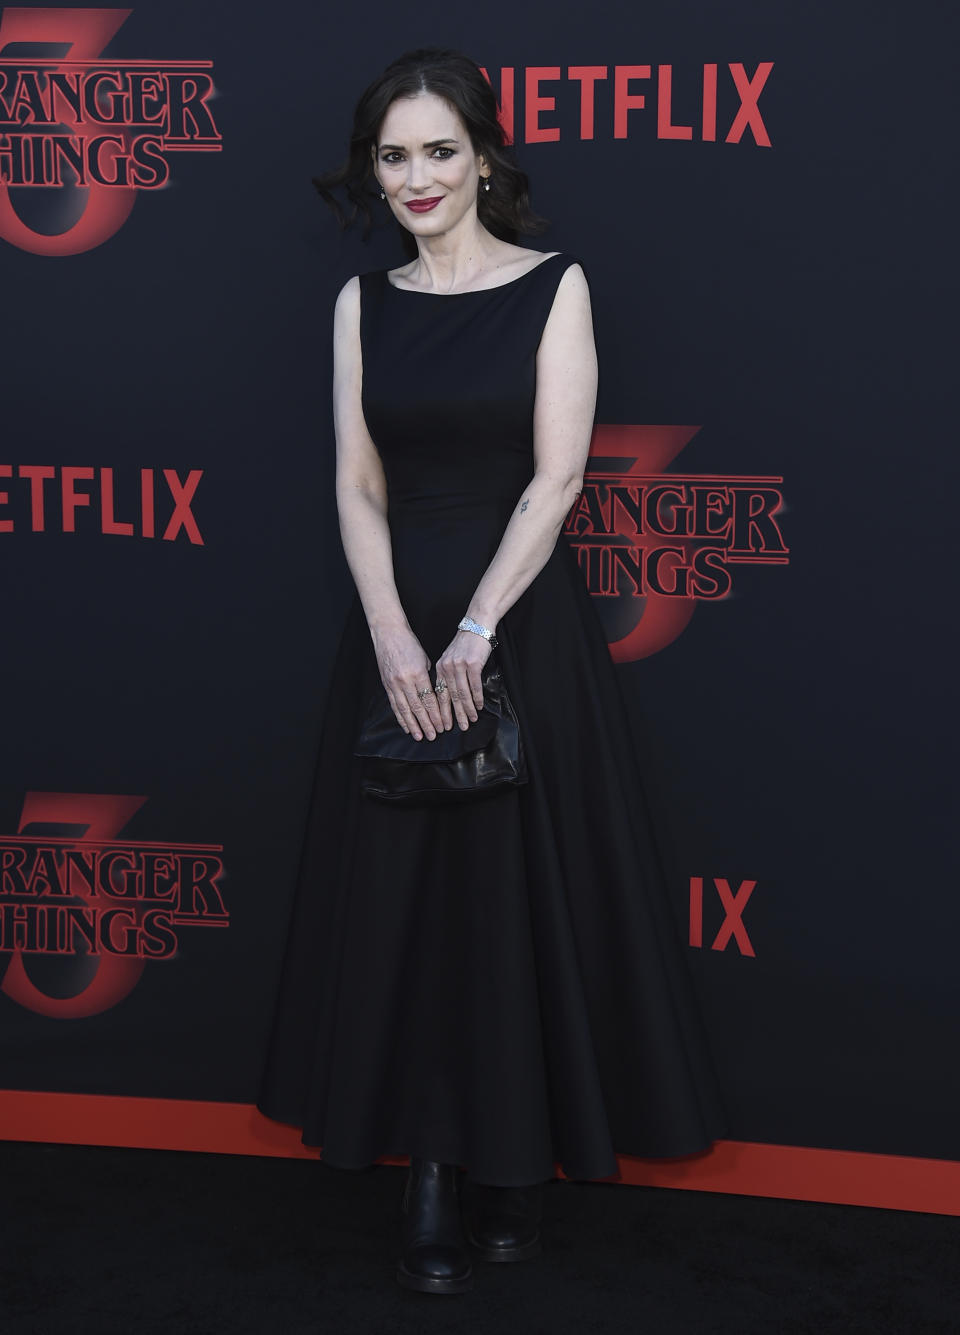 FILE - Winona Ryder arrives at the season three premiere of "Stranger Things" on June 28, 2019, in Santa Monica, Calif. Ryder turns 51 on Oct. 29. (Photo by Jordan Strauss/Invision/AP, File)